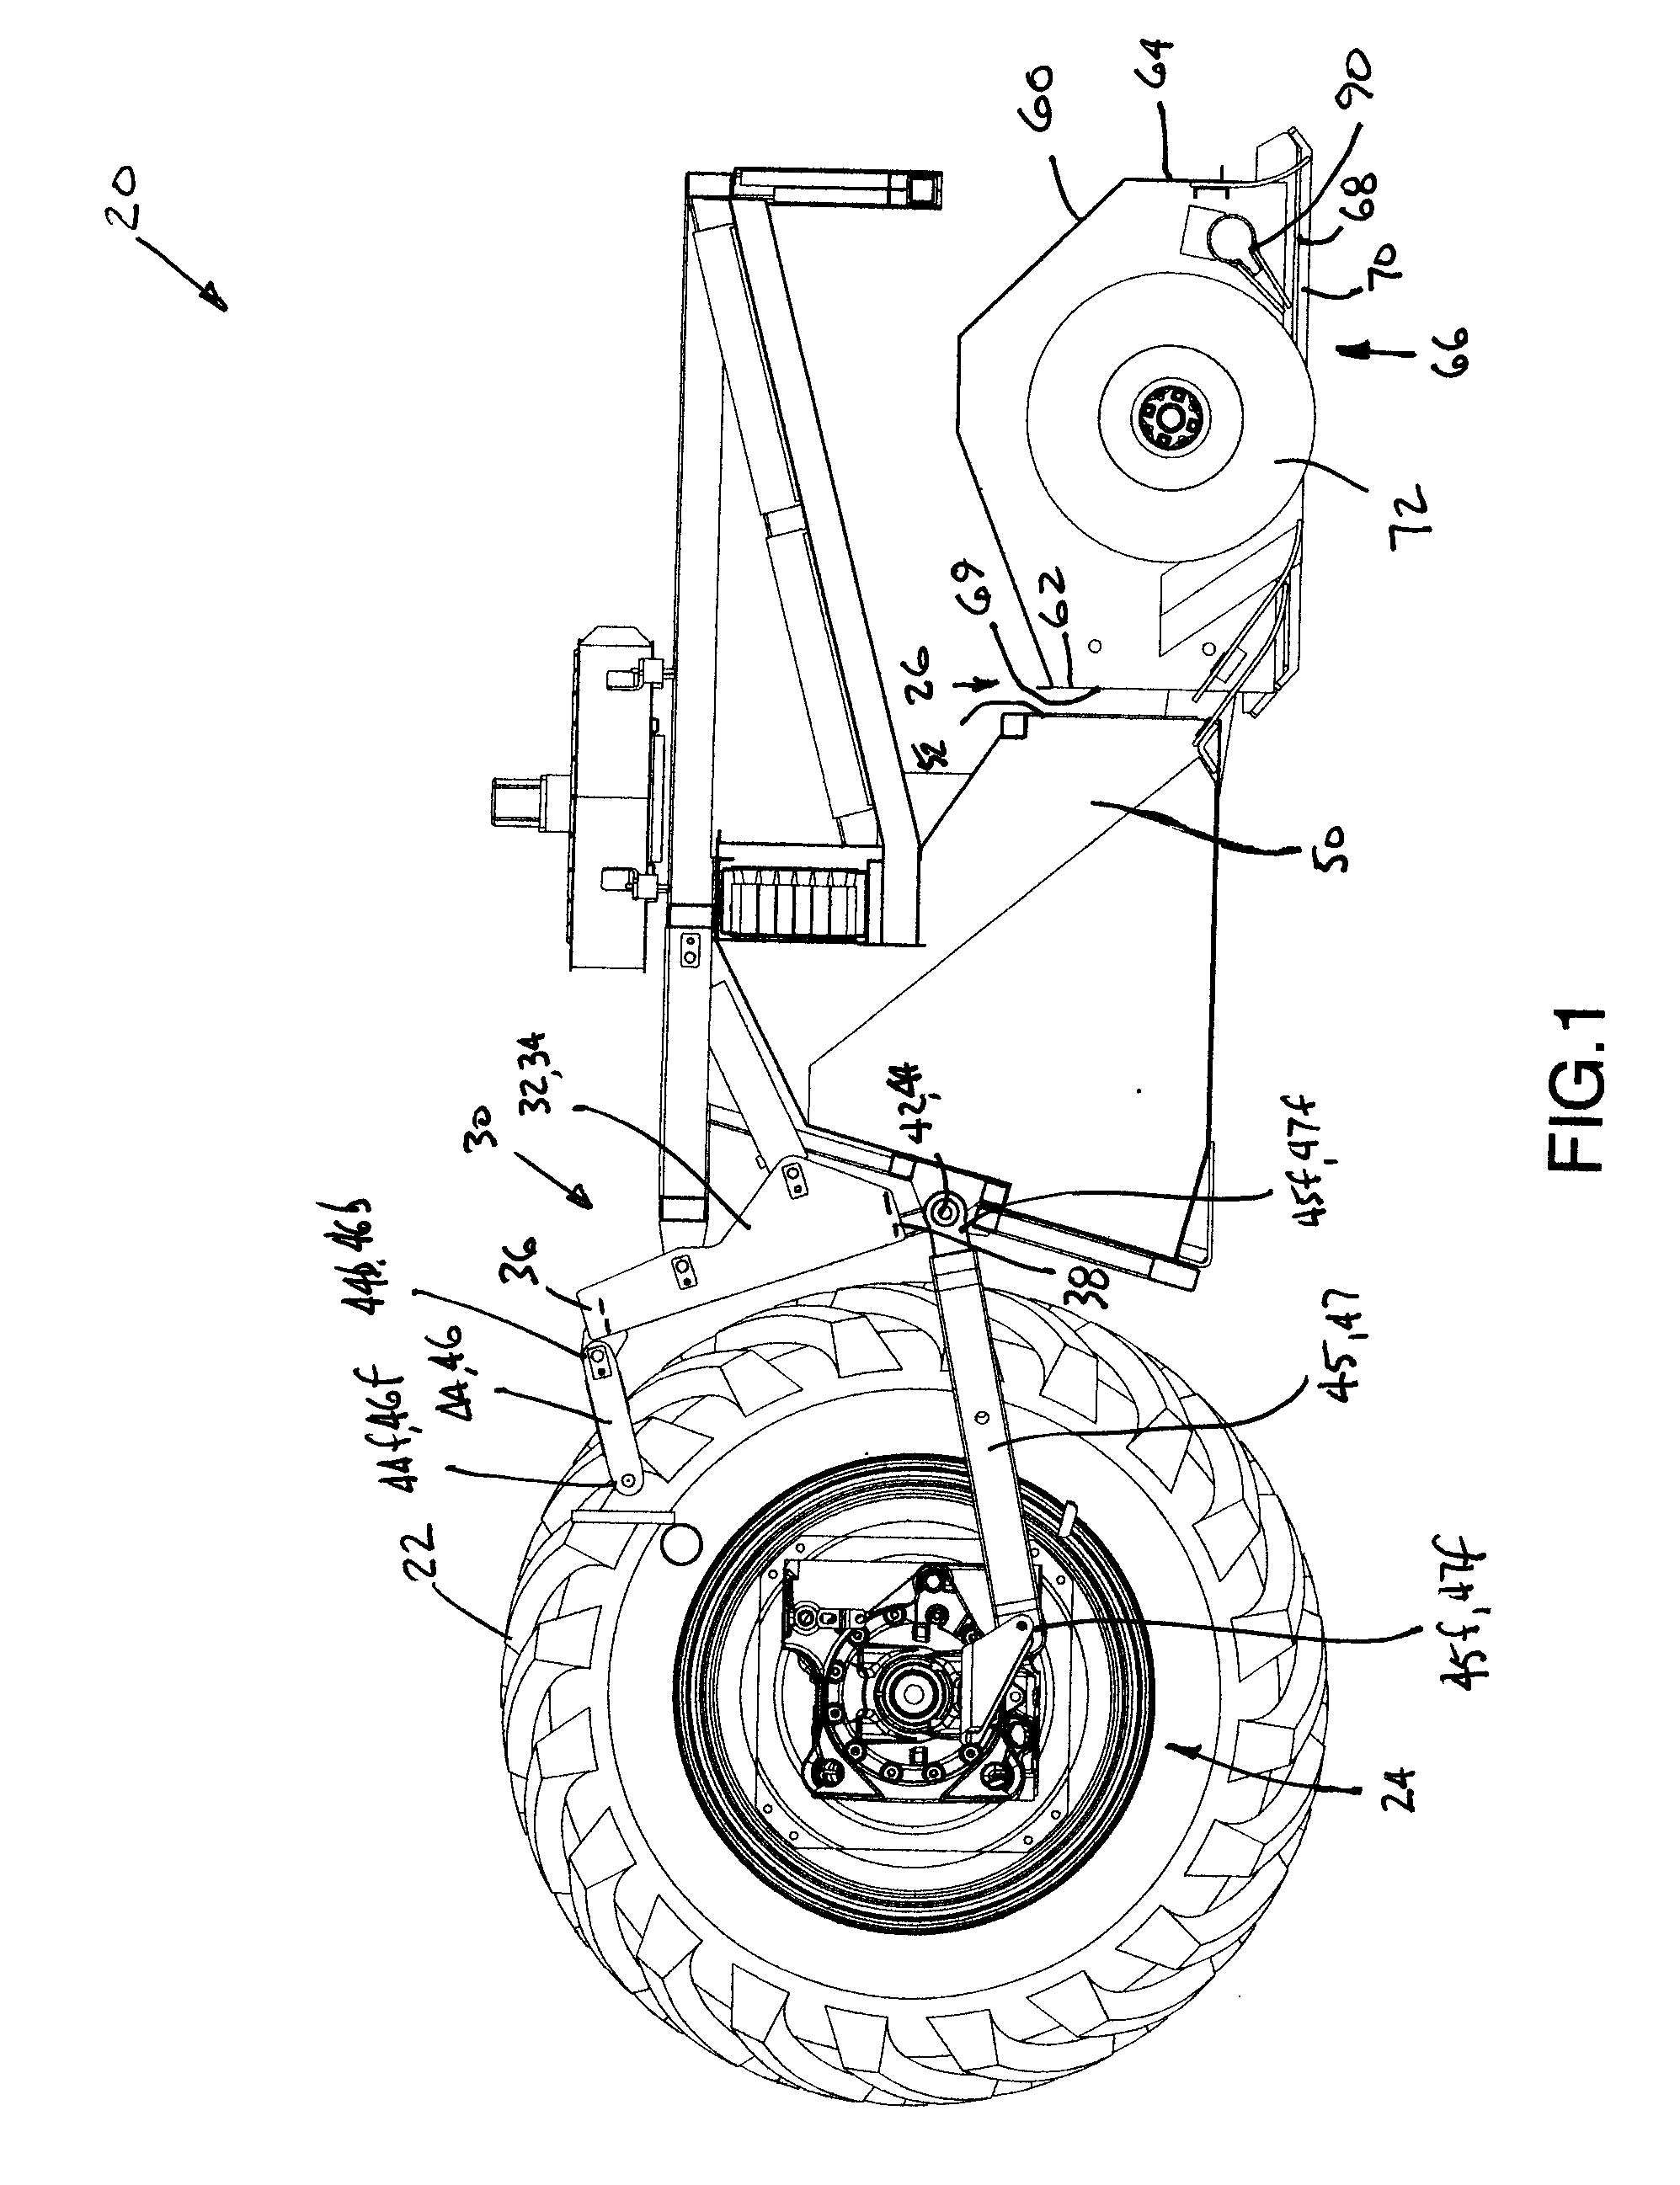 Sweeping broom apparatus having a surface tracking air blast nozzle